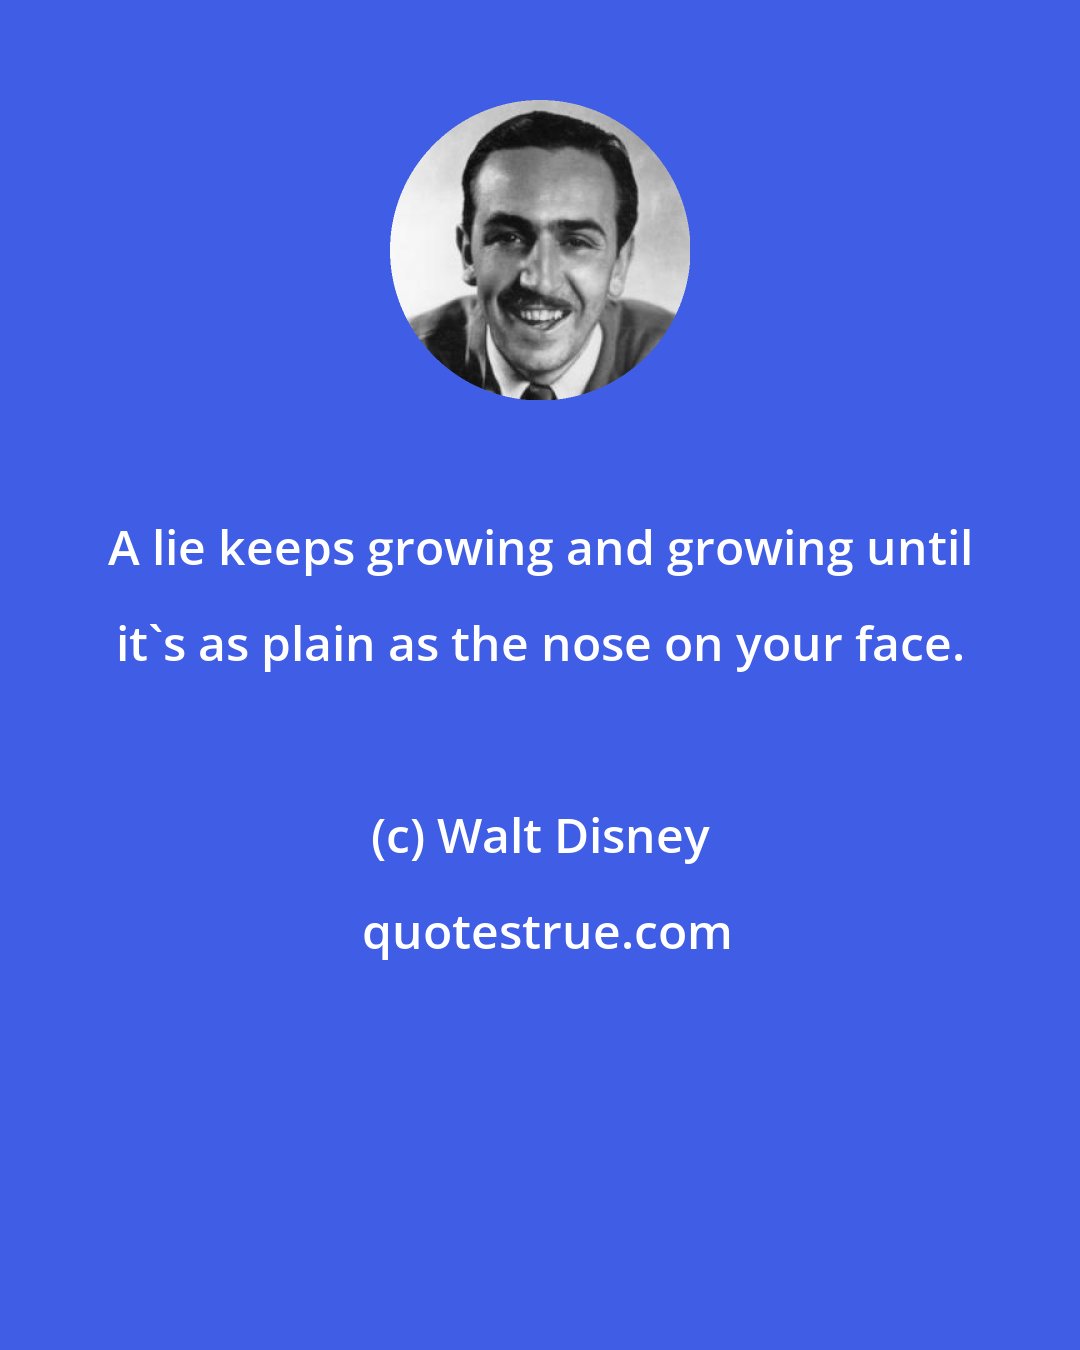 Walt Disney: A lie keeps growing and growing until it's as plain as the nose on your face.